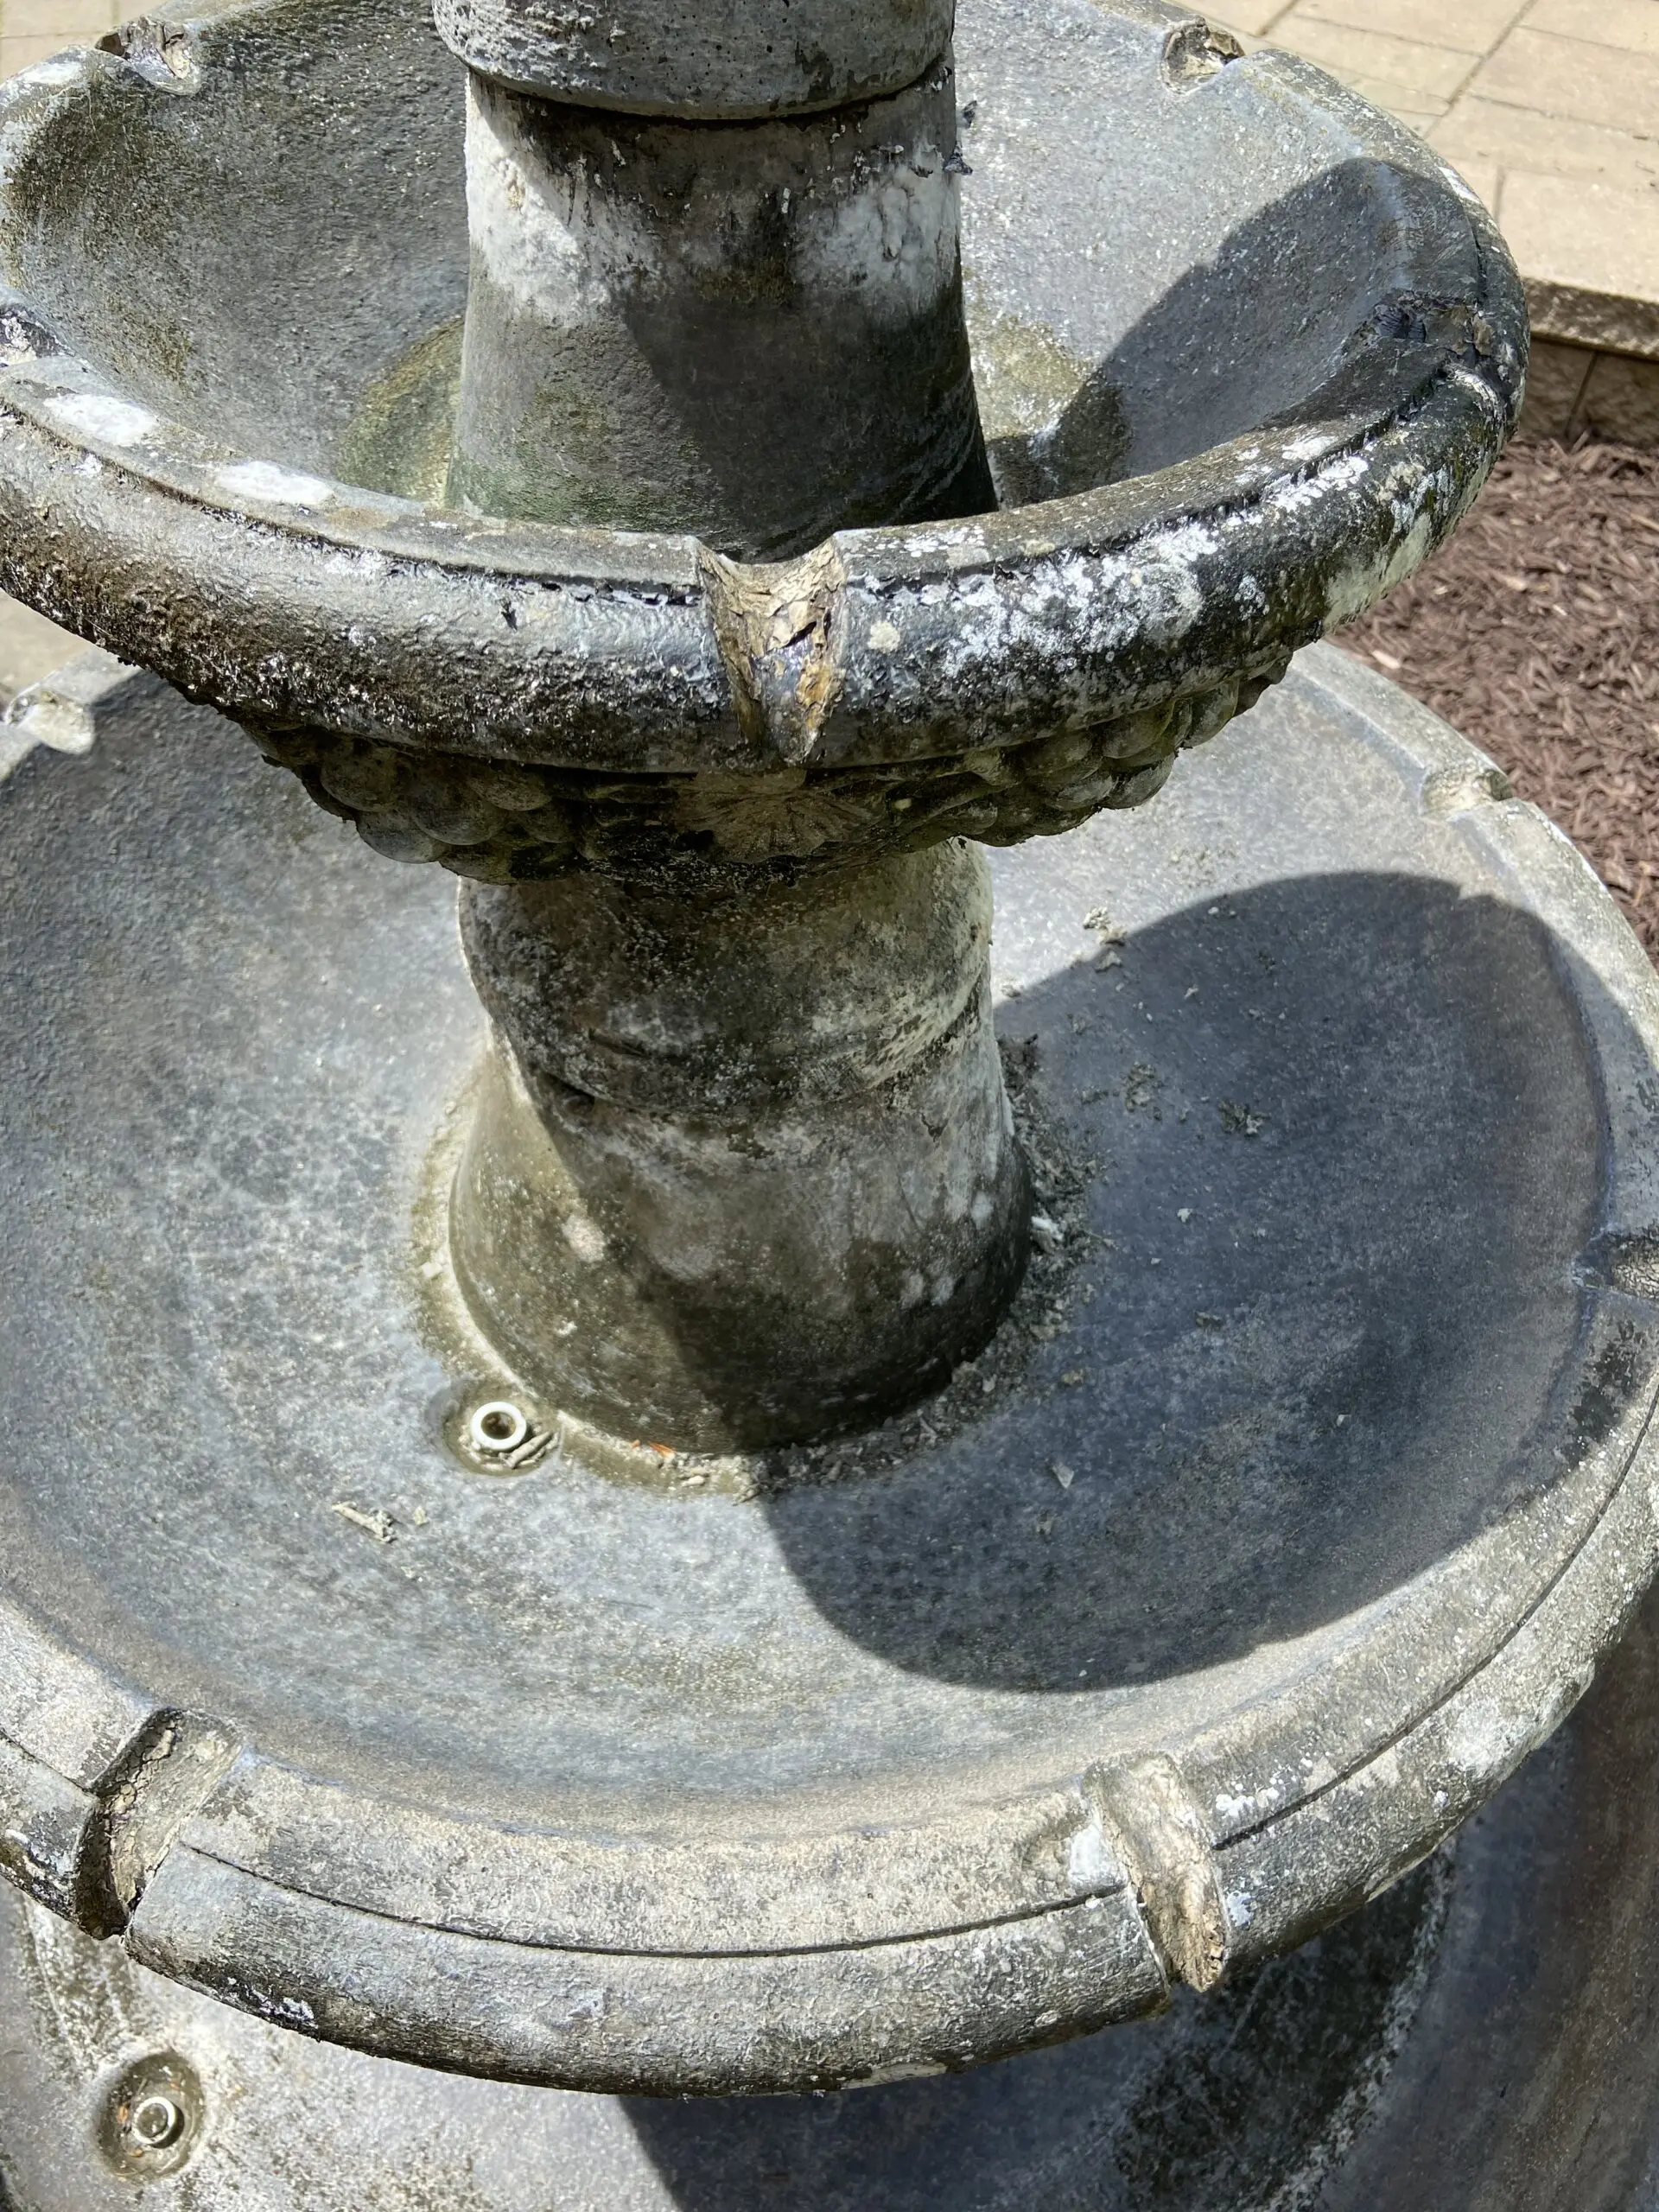 A weathered, three-tier fountain in desperate need of restoration. The impact of harsh Ohio winters and sun fading is evident on the faded concrete structure